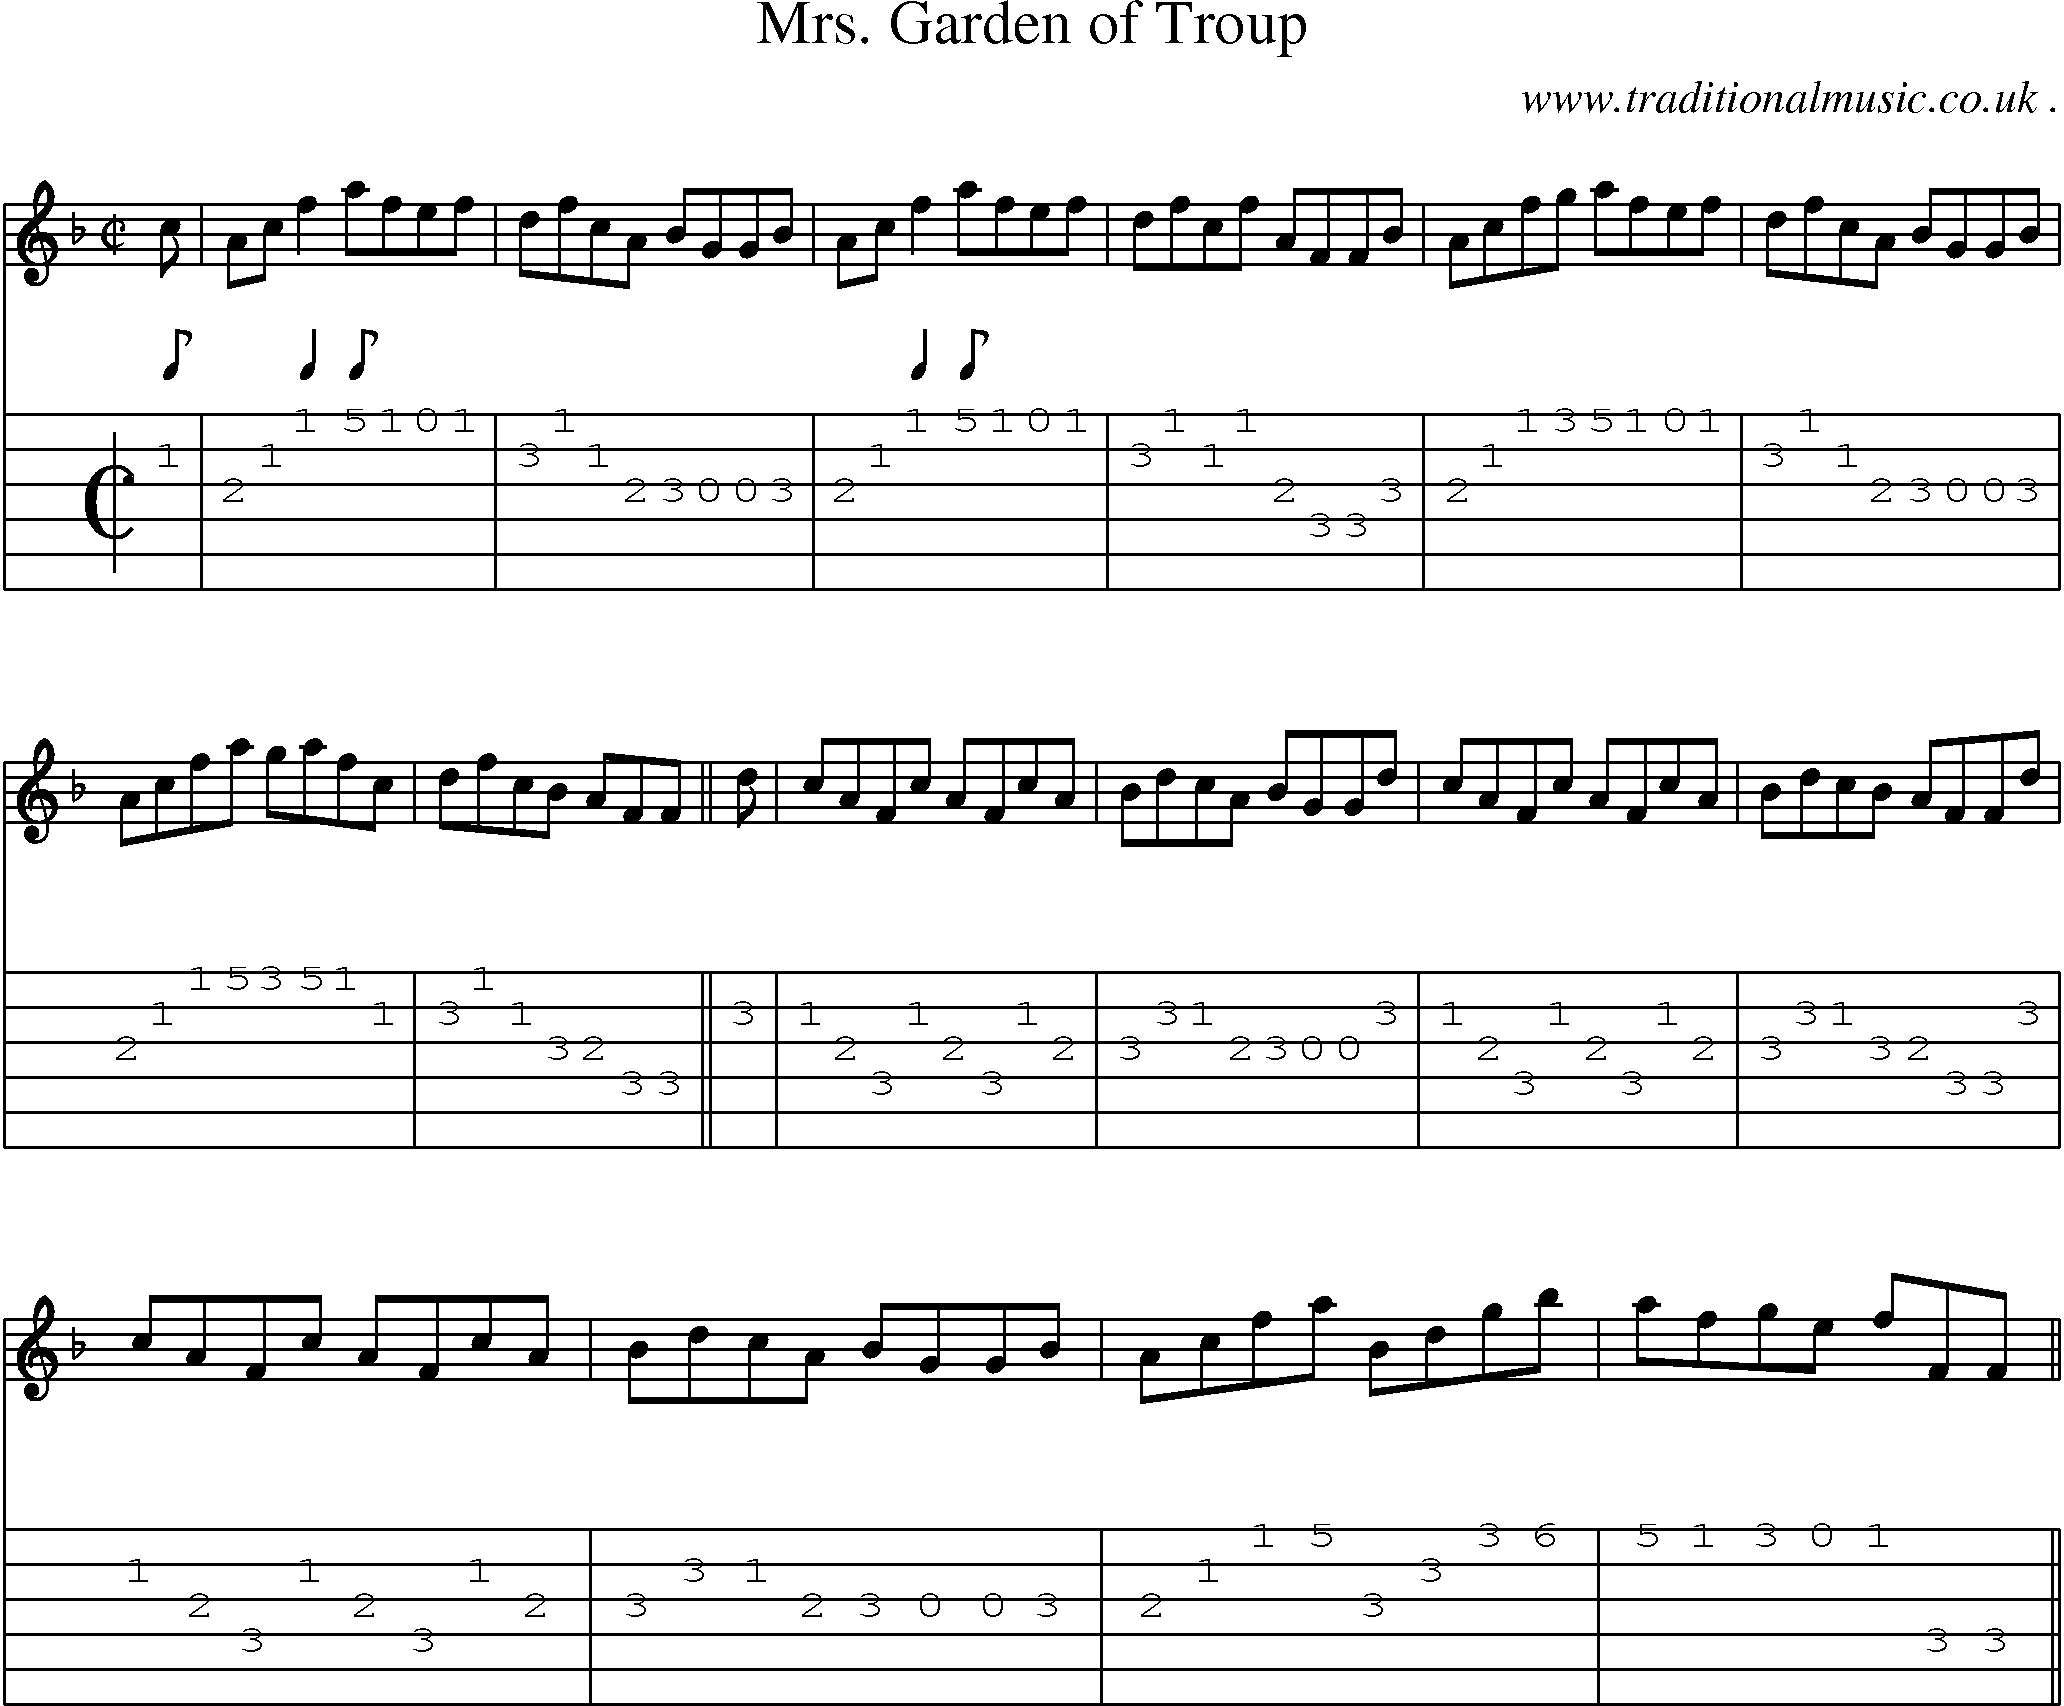 Sheet-music  score, Chords and Guitar Tabs for Mrs Garden Of Troup